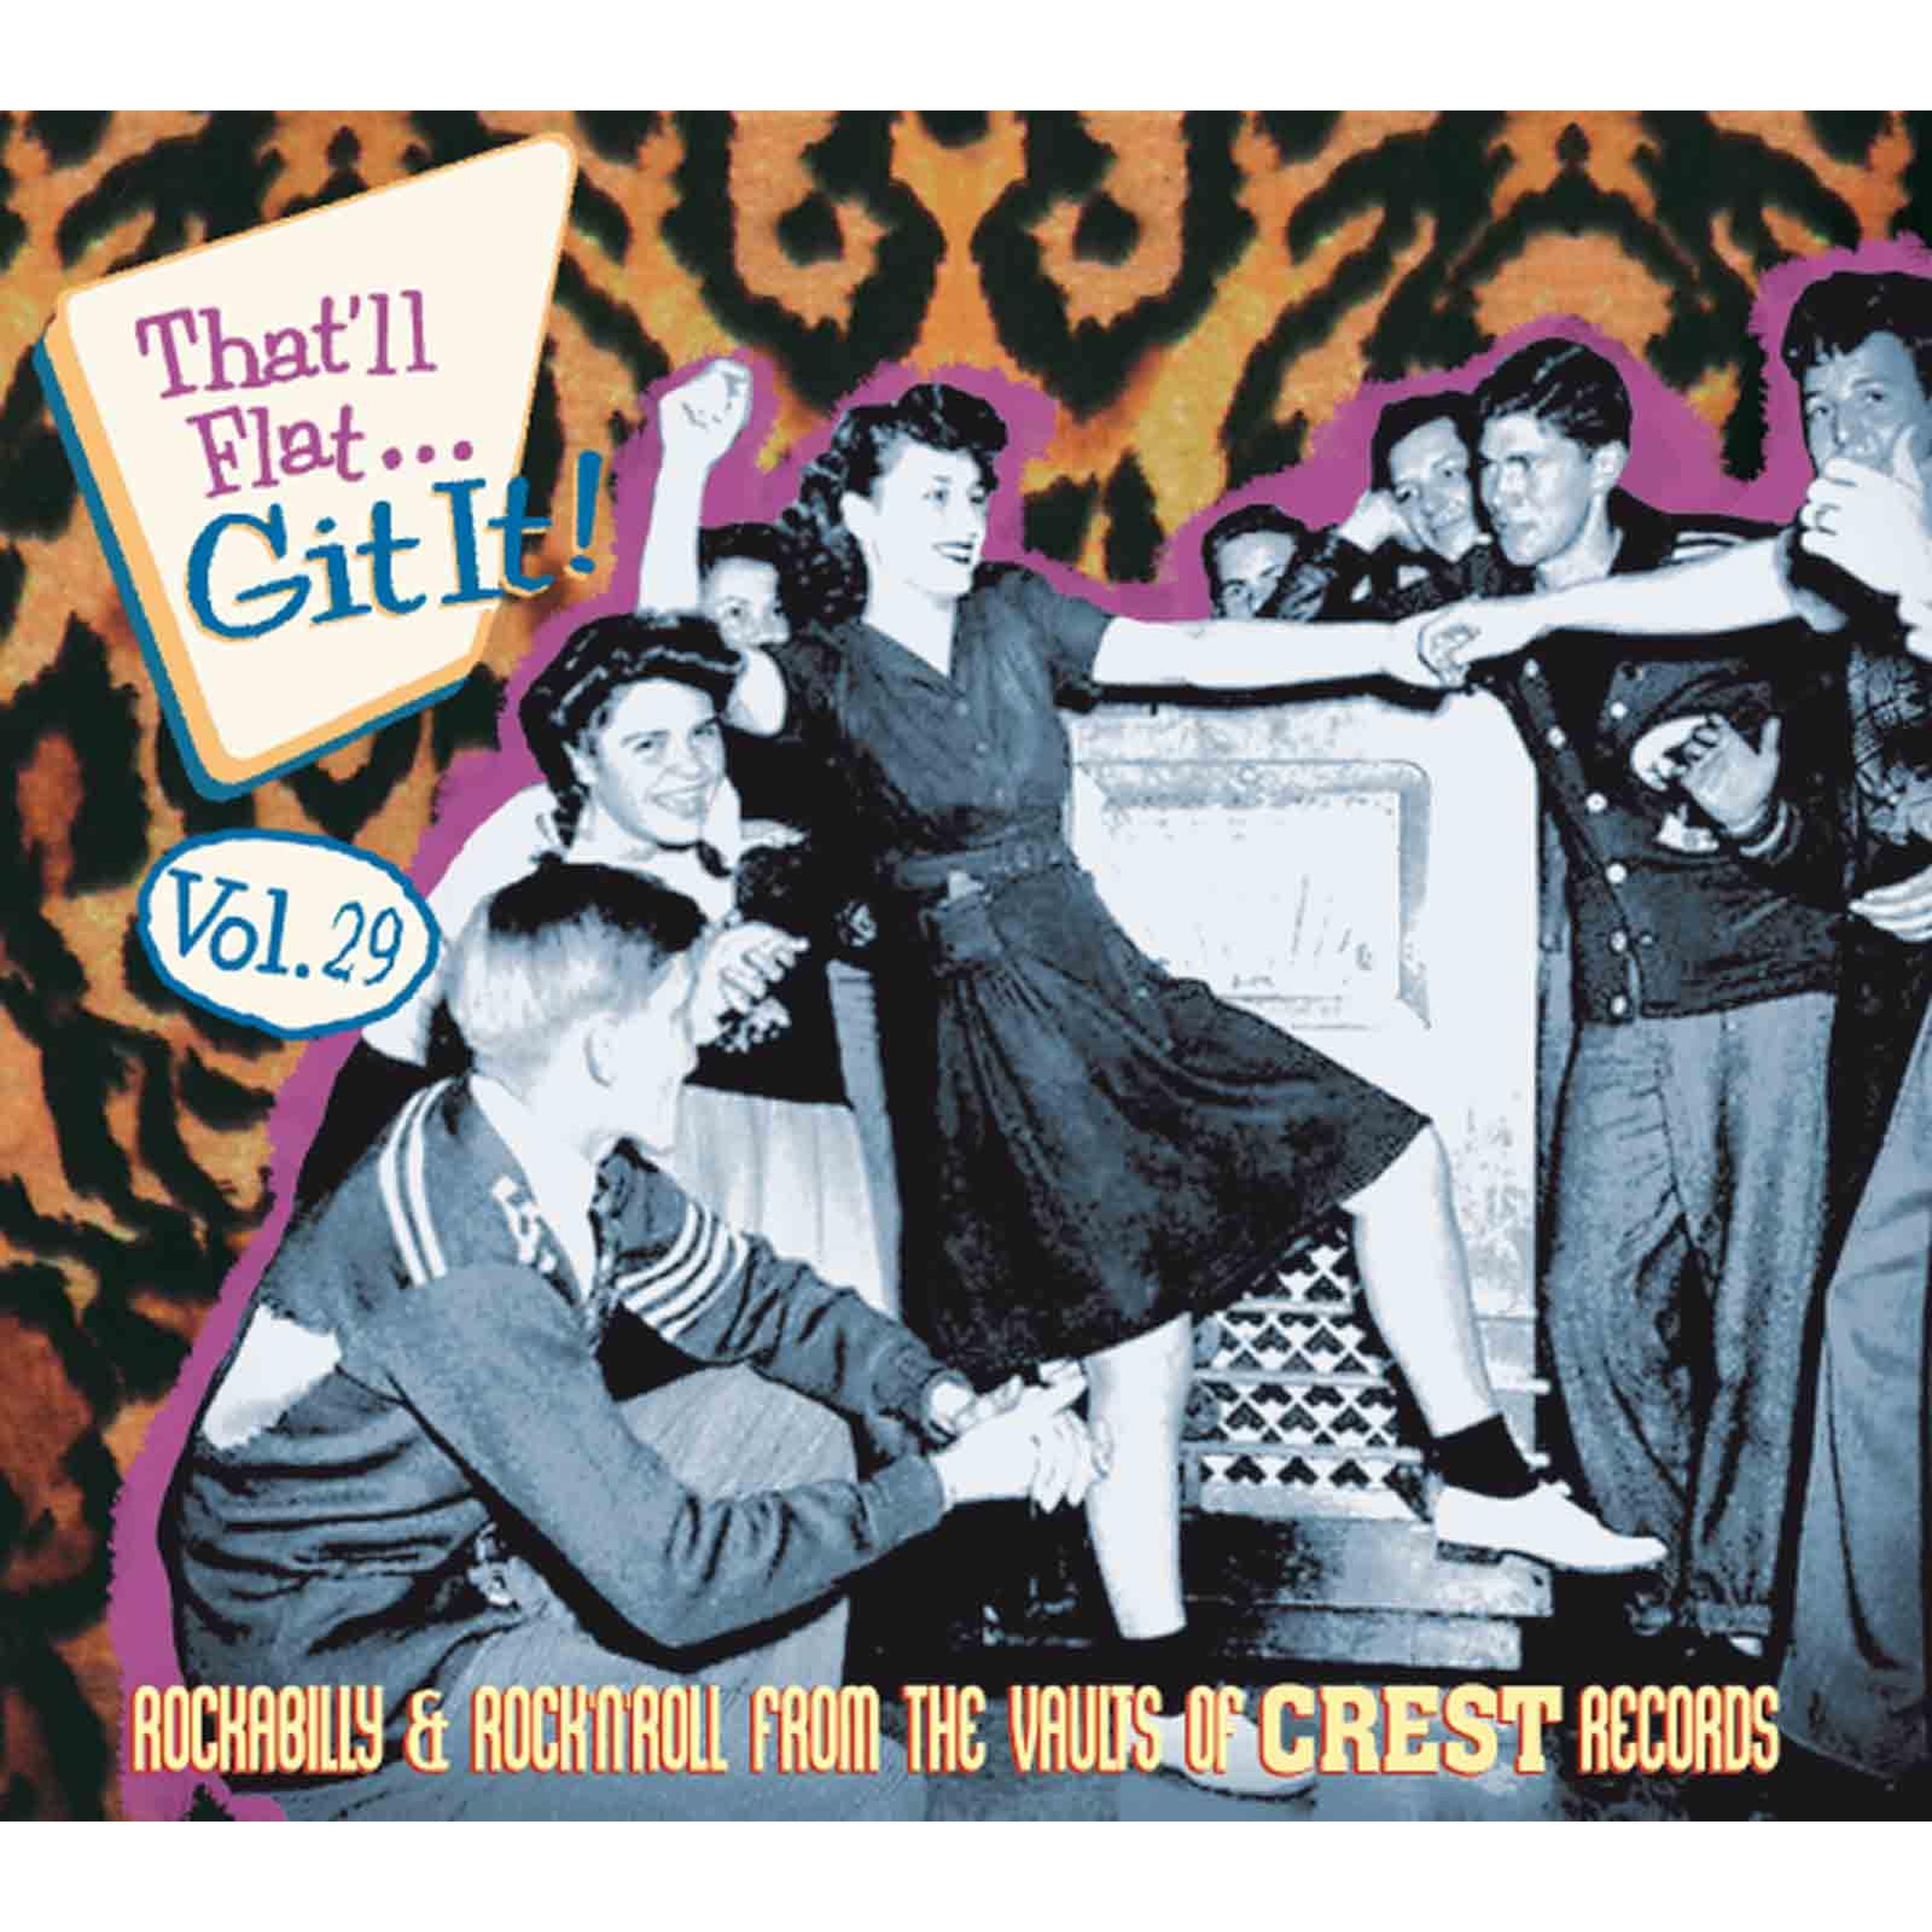 That'll Flat Git It, Vol. 29 - Rockabilly & Rock 'n' Roll from the Vaults of Crest Records